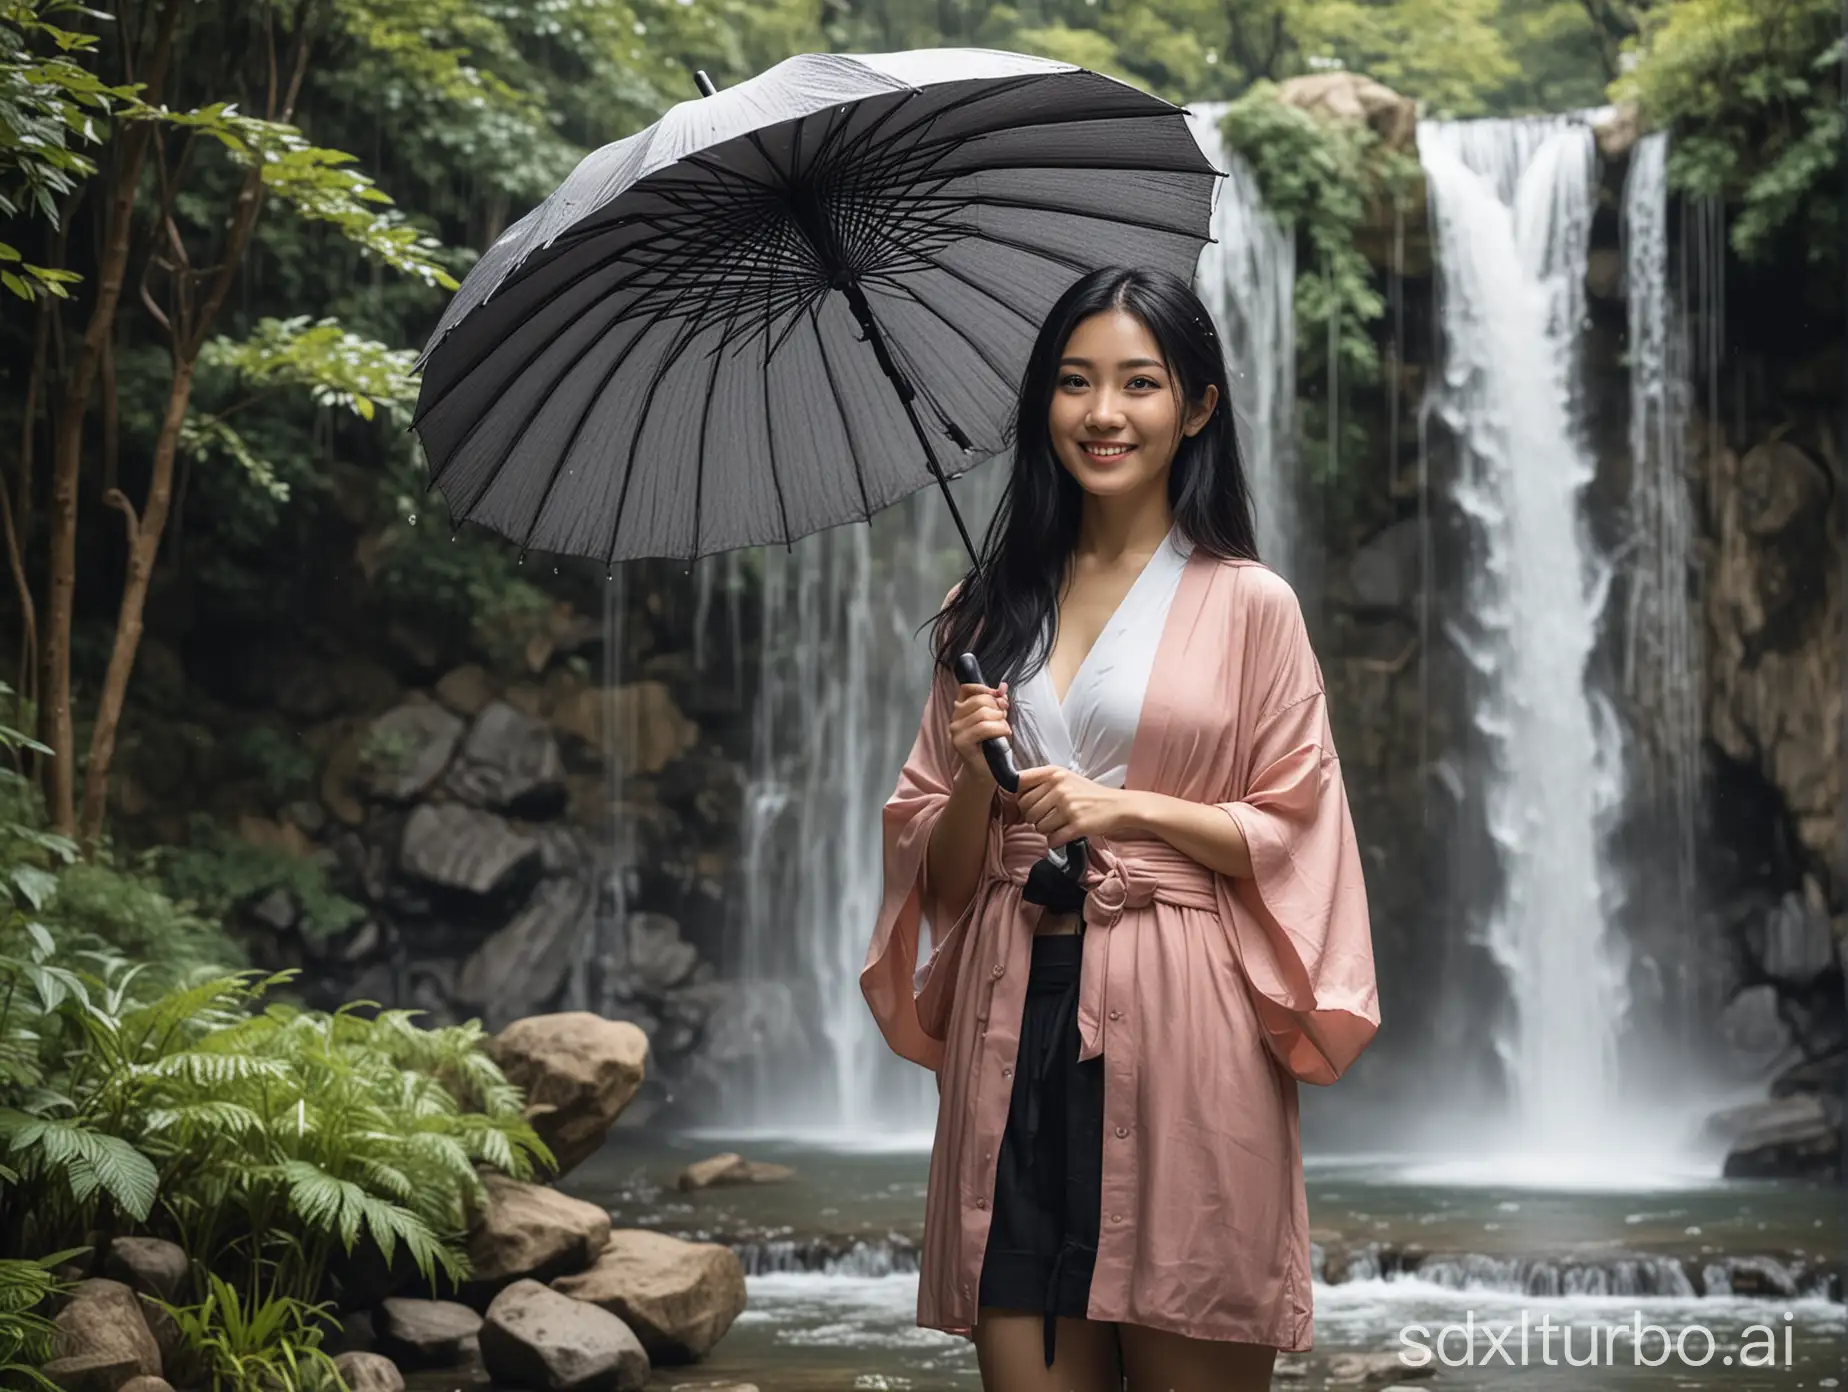 Graceful-Japanese-Woman-Smiling-by-Waterfall-with-Umbrella